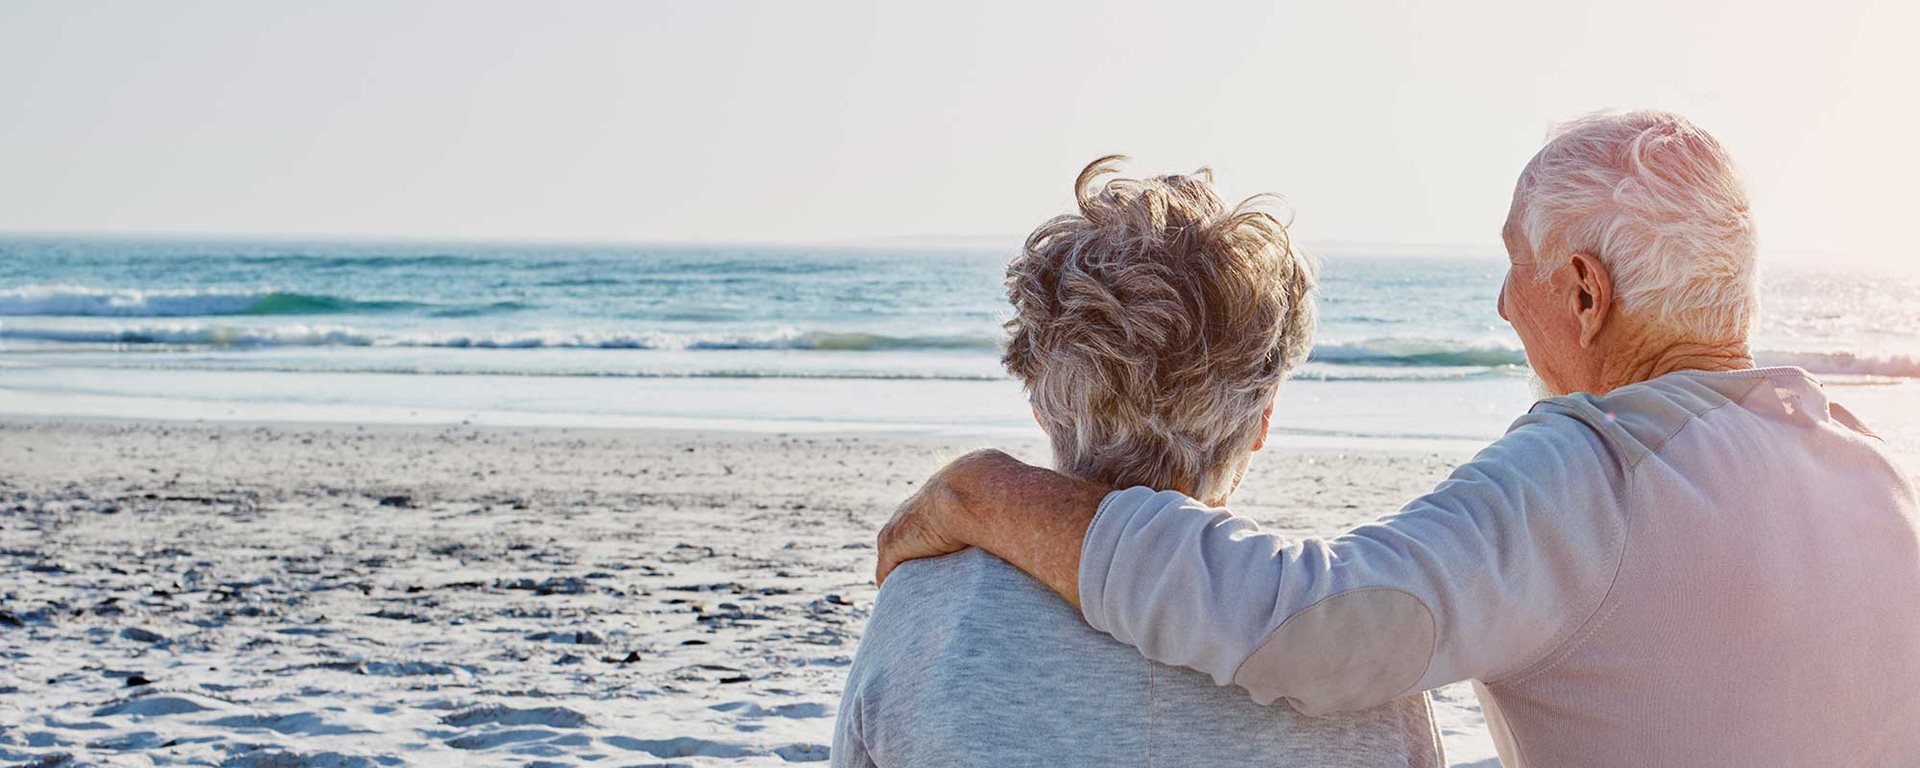 Old couple standing on beach looking towards the ocean